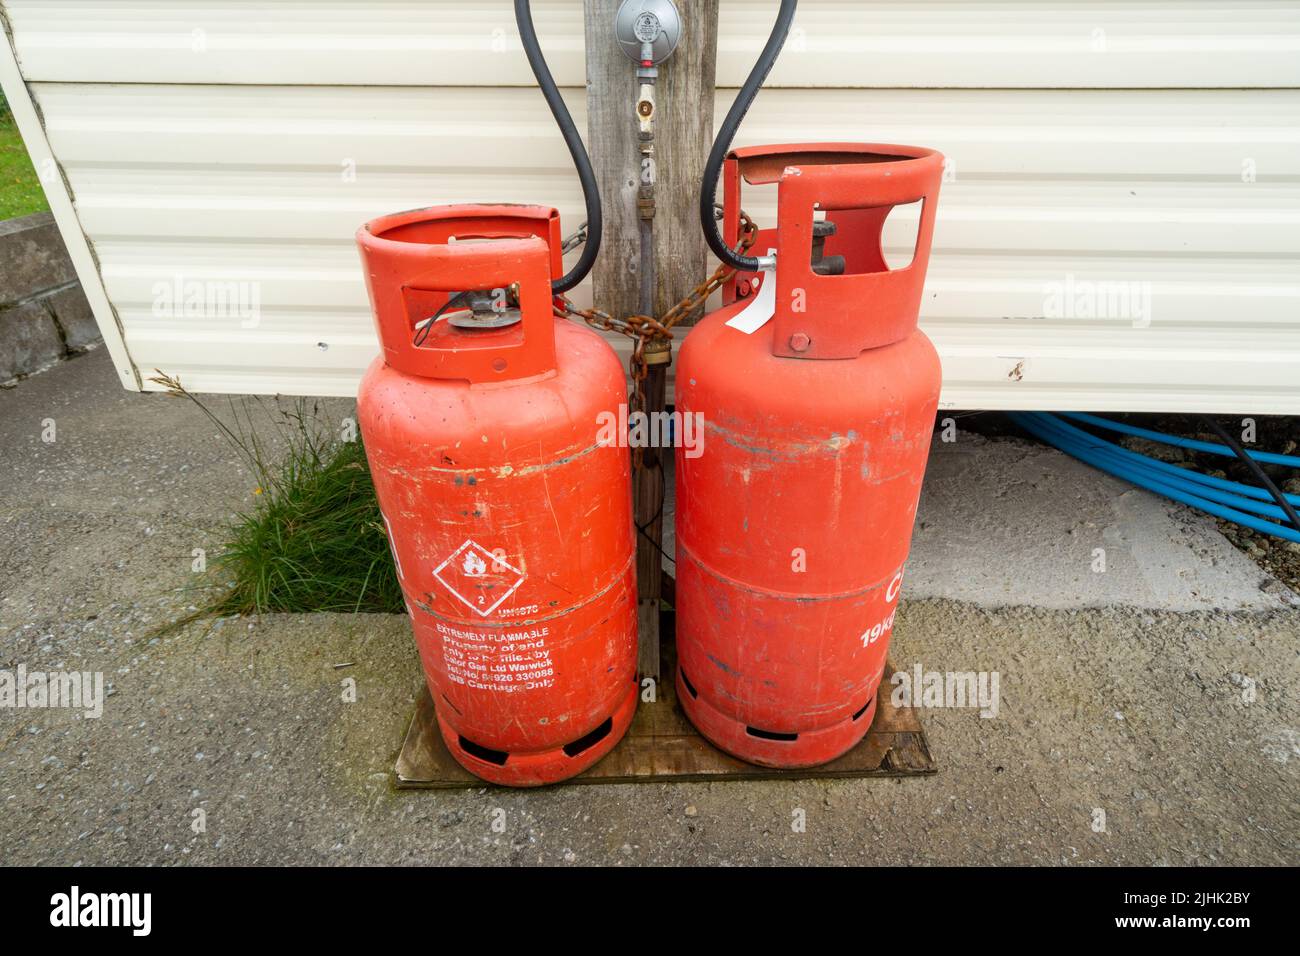 Installation of twin 19kg gas bottles or cylinders, Calor propane for heating and hot water supply to a caravan or trailer, Scotland, UK Stock Photo